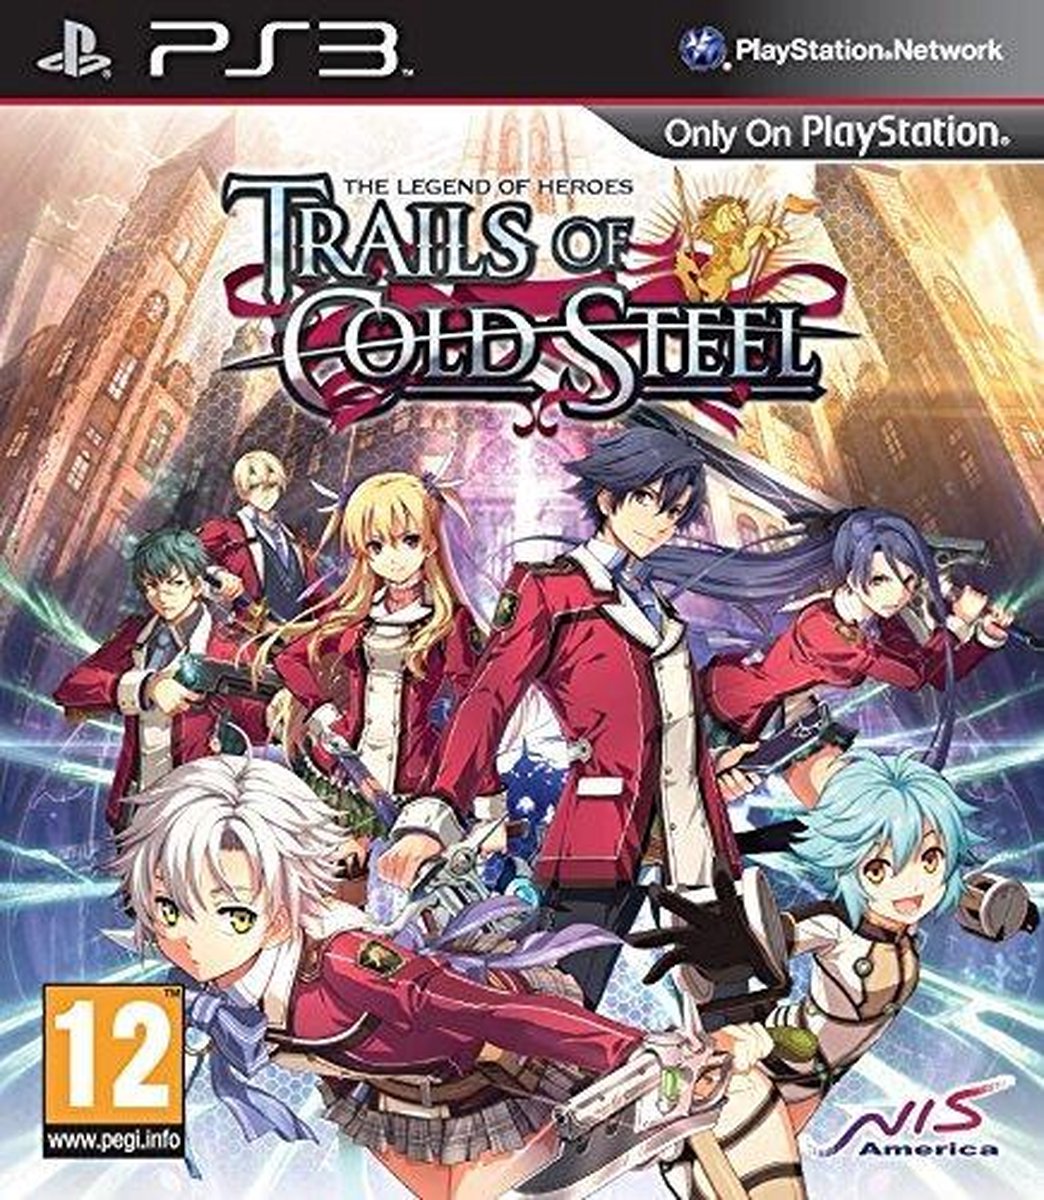 Nis The Legend of Heroes Trails of Cold Steel